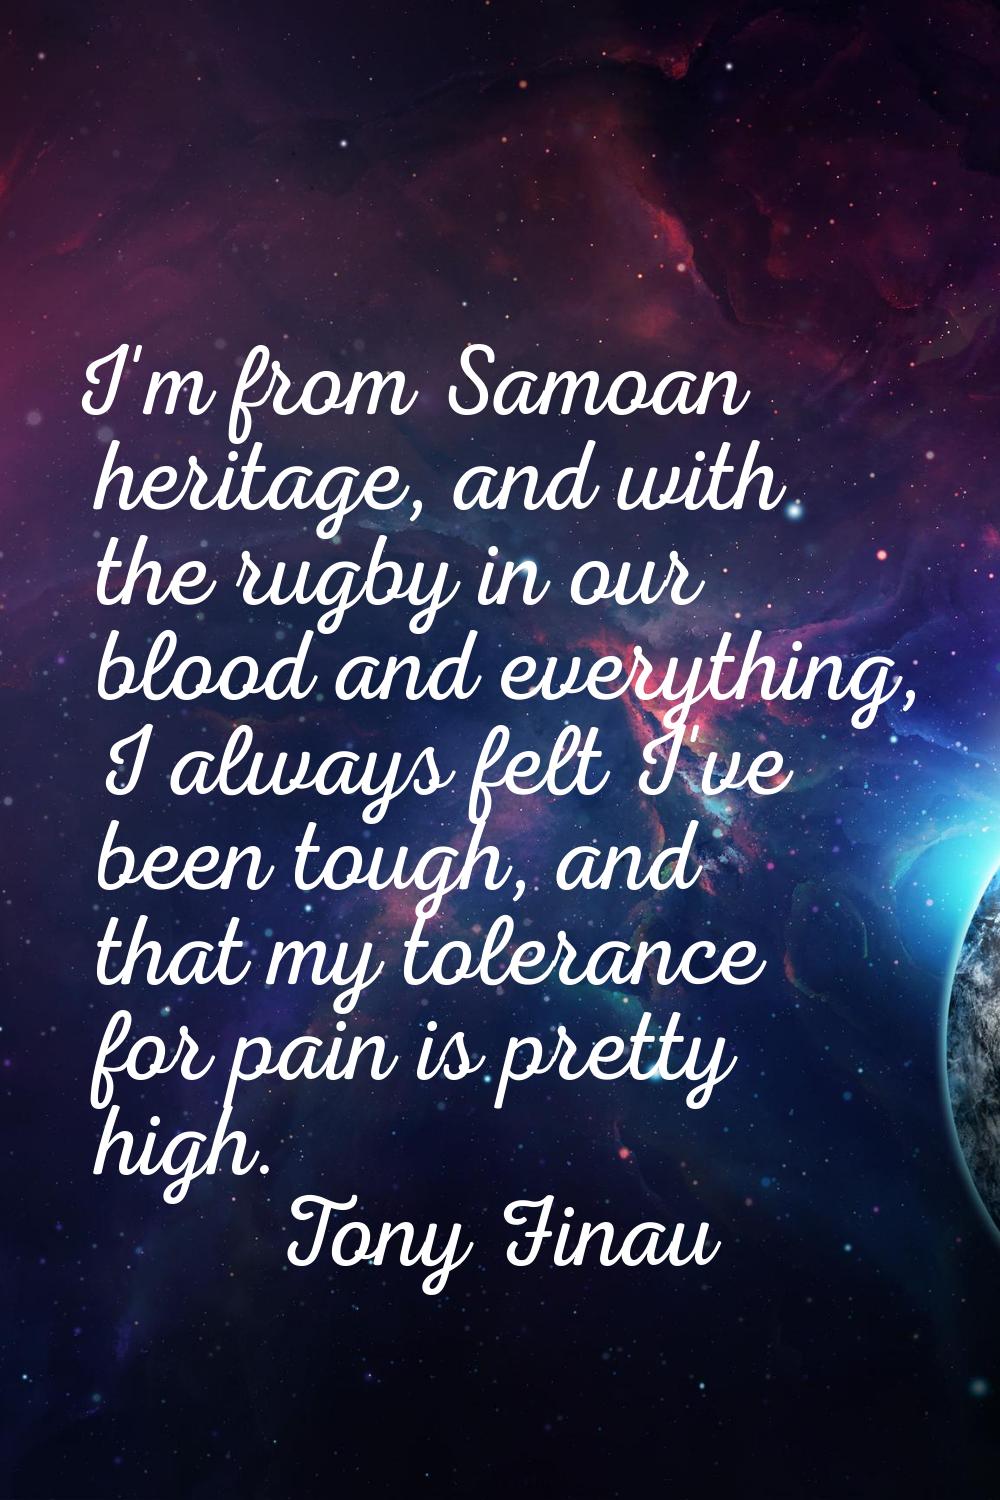 I'm from Samoan heritage, and with the rugby in our blood and everything, I always felt I've been t